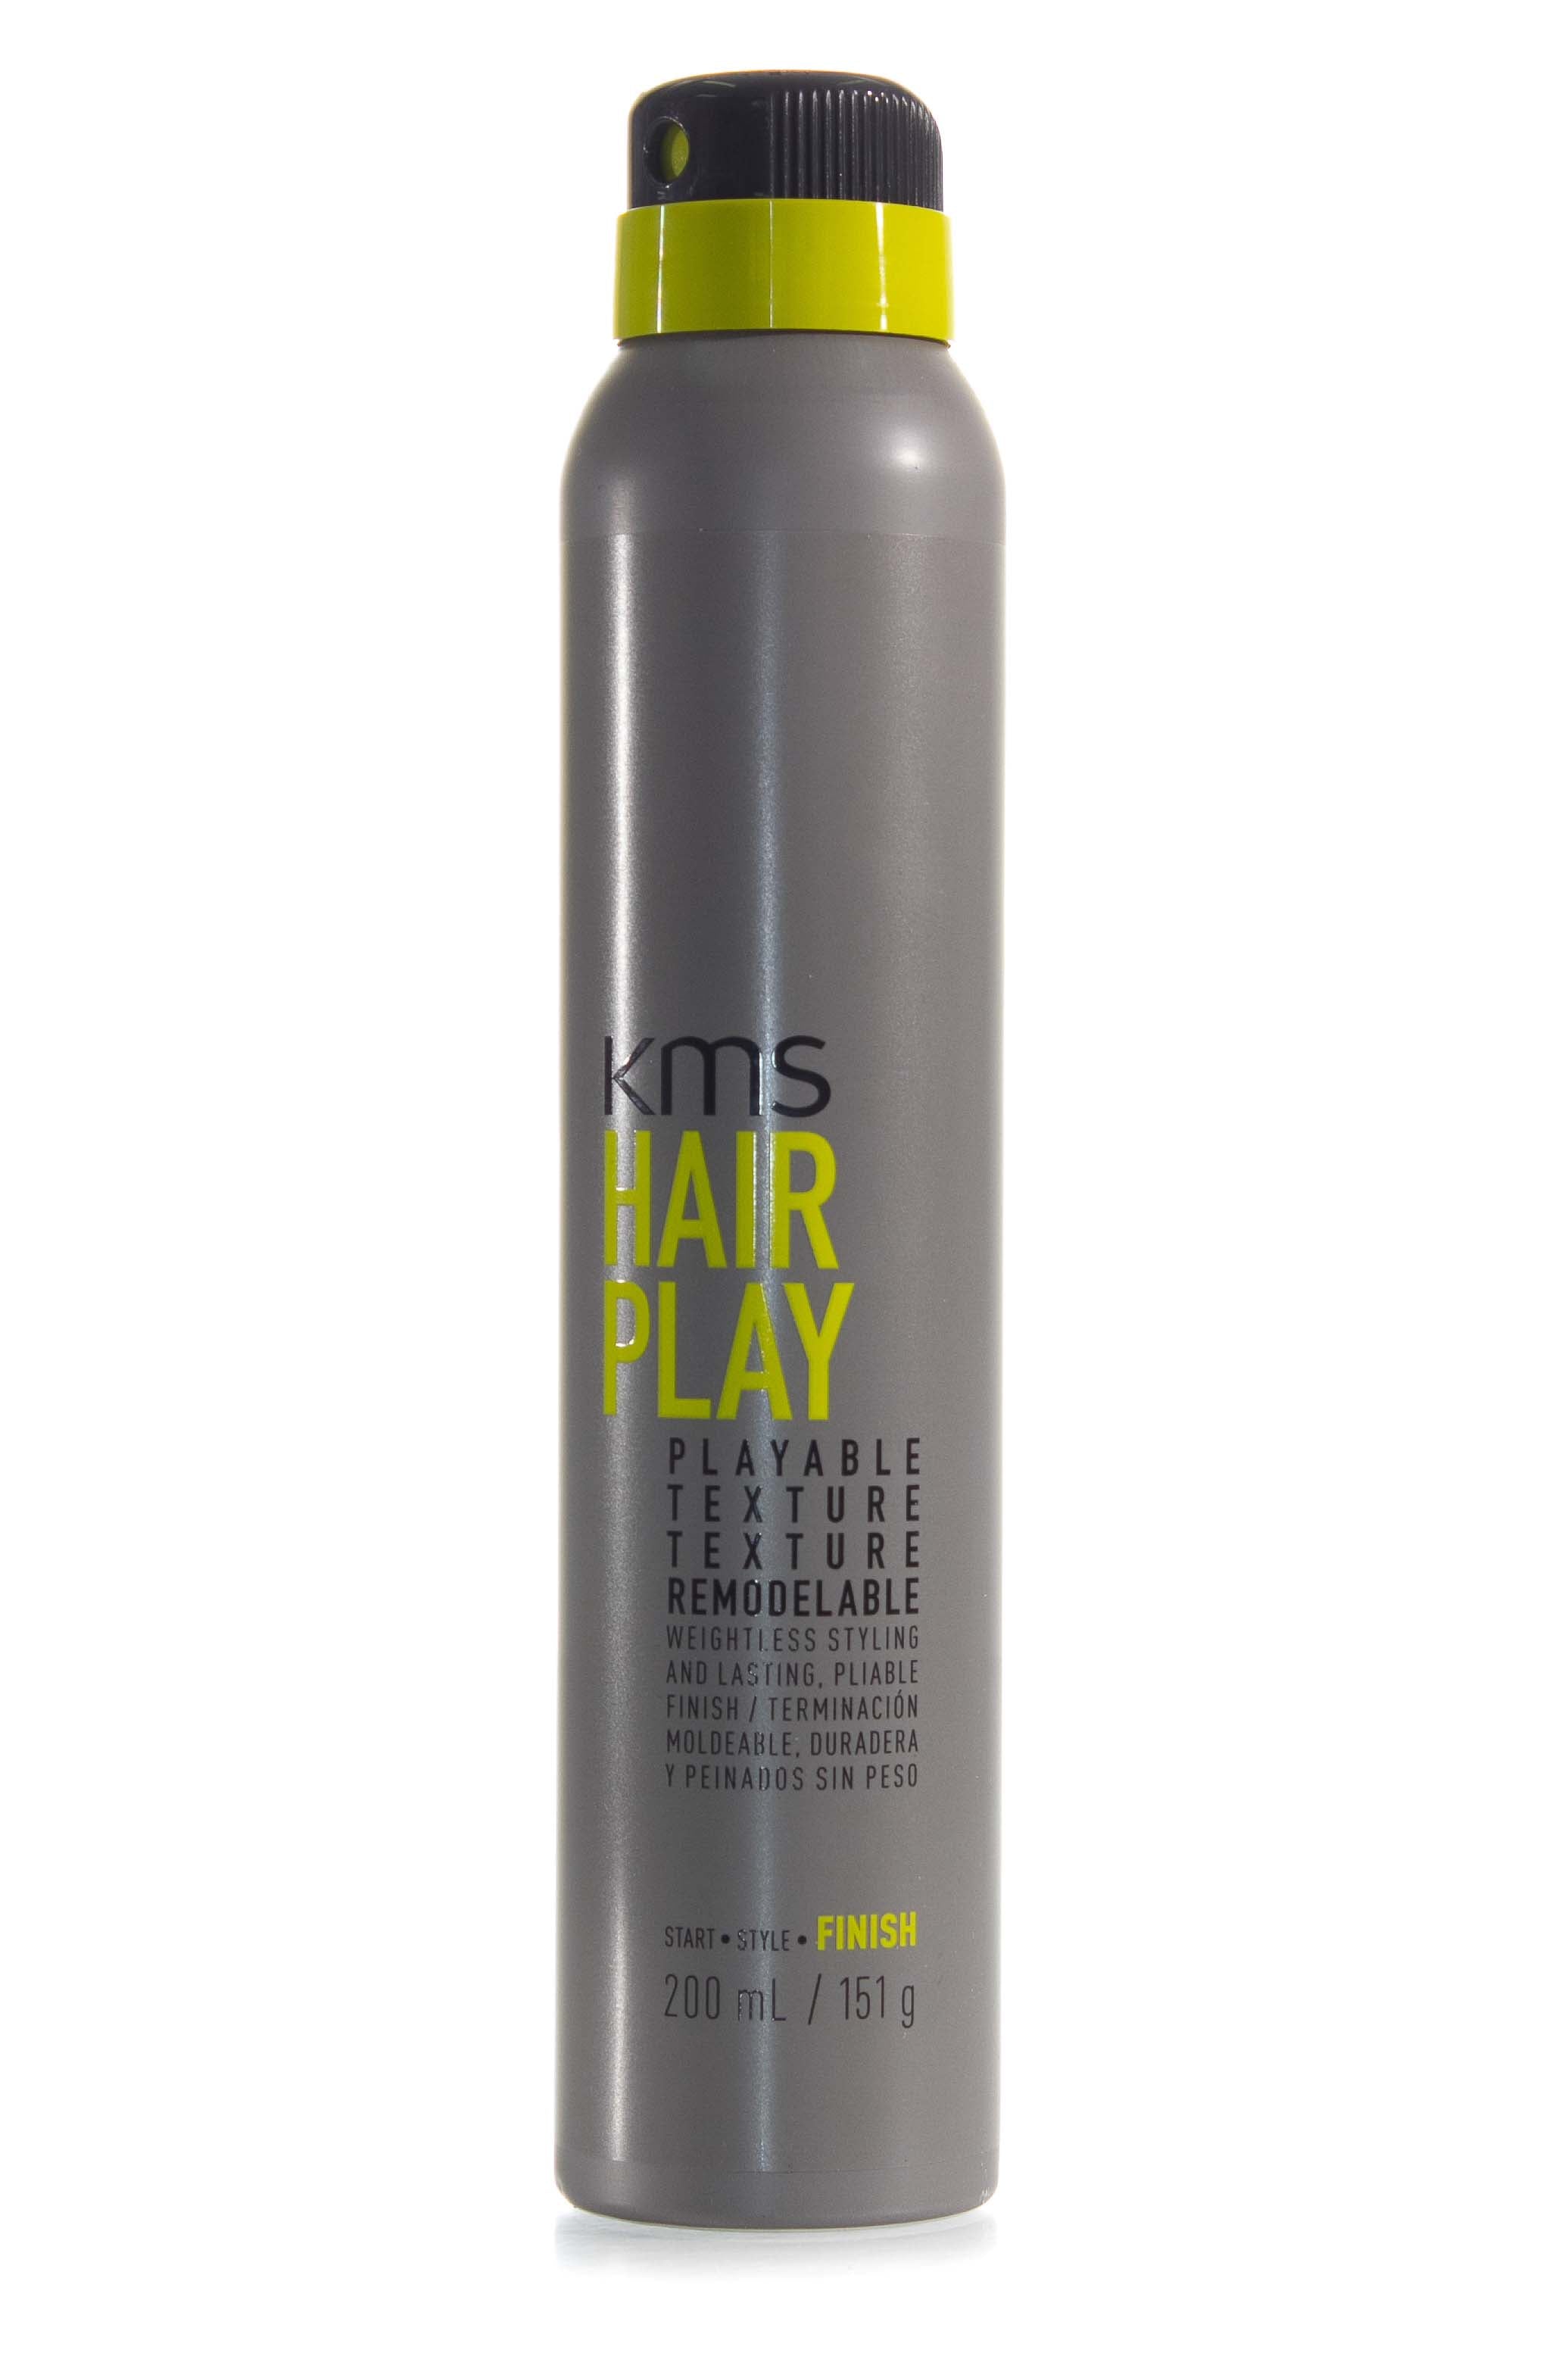 rille Grundlægger forbi KMS Hair Play Playable Texture - 200ml | Styling – Hair Gang Online